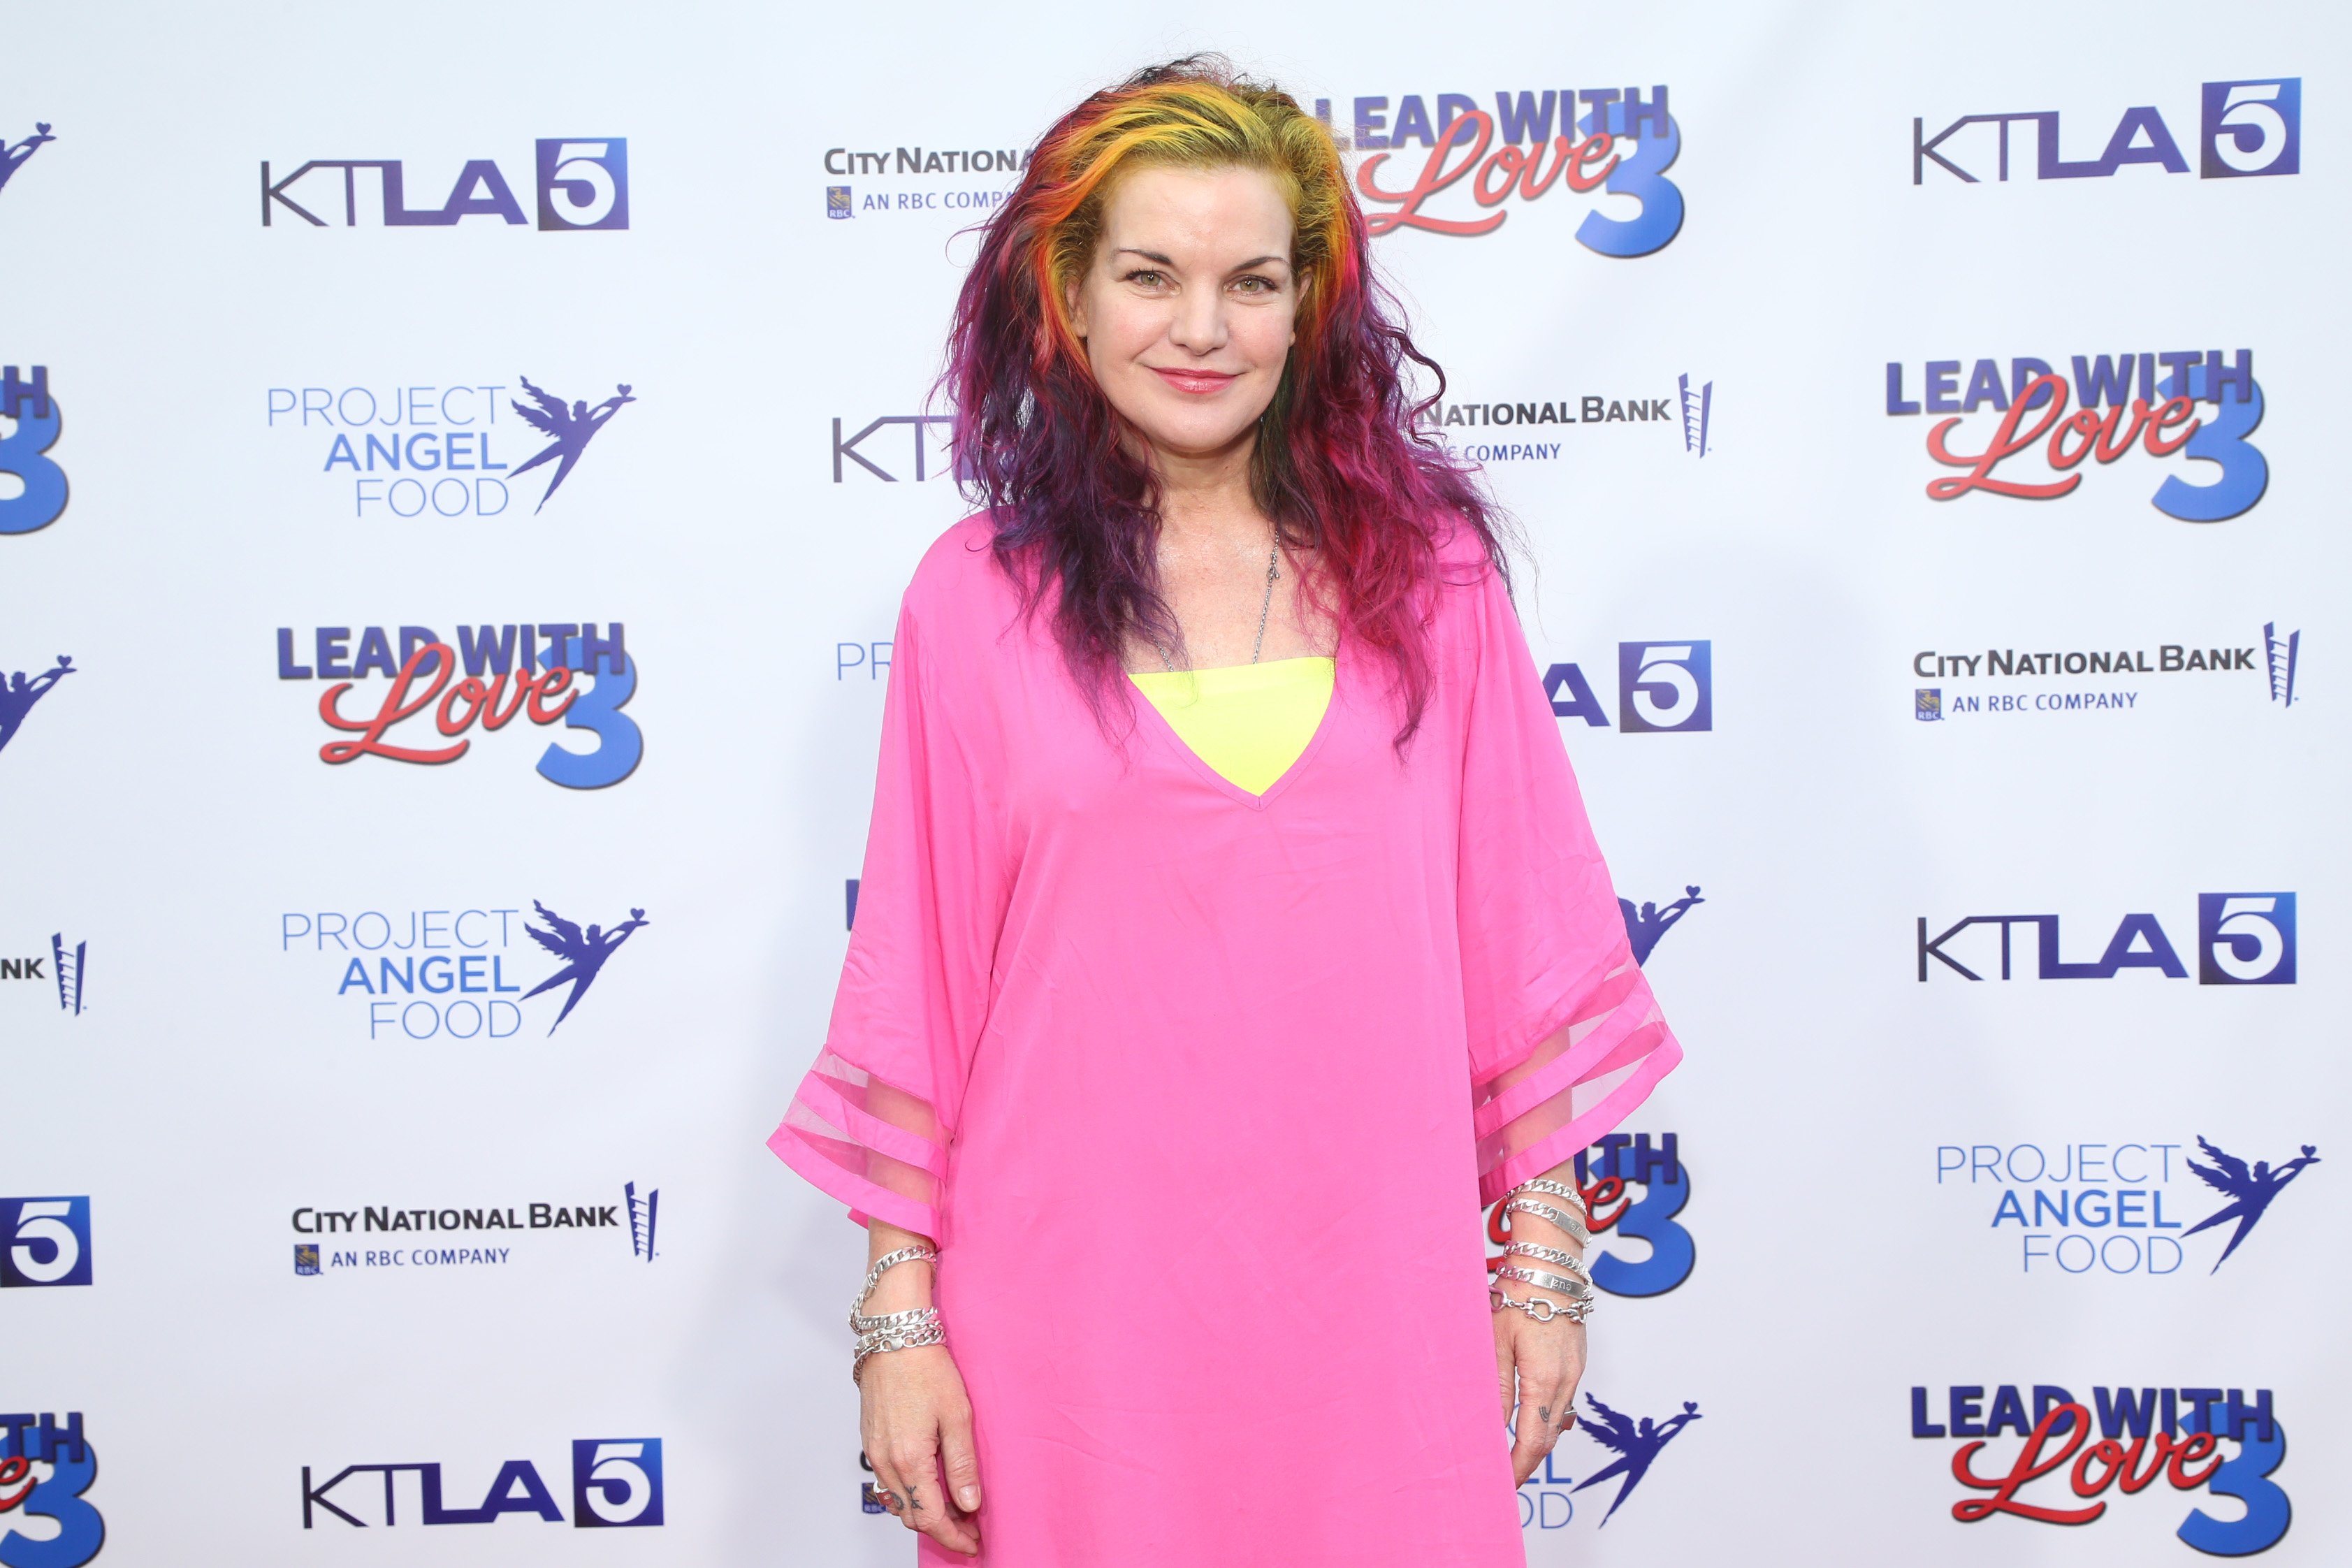 Pauley Perrette attends Project Angel Food's Lead with Love 3 - a Fundraising Special on KTLA on July 23, 2022, in Los Angeles, California. | Source: Getty Images